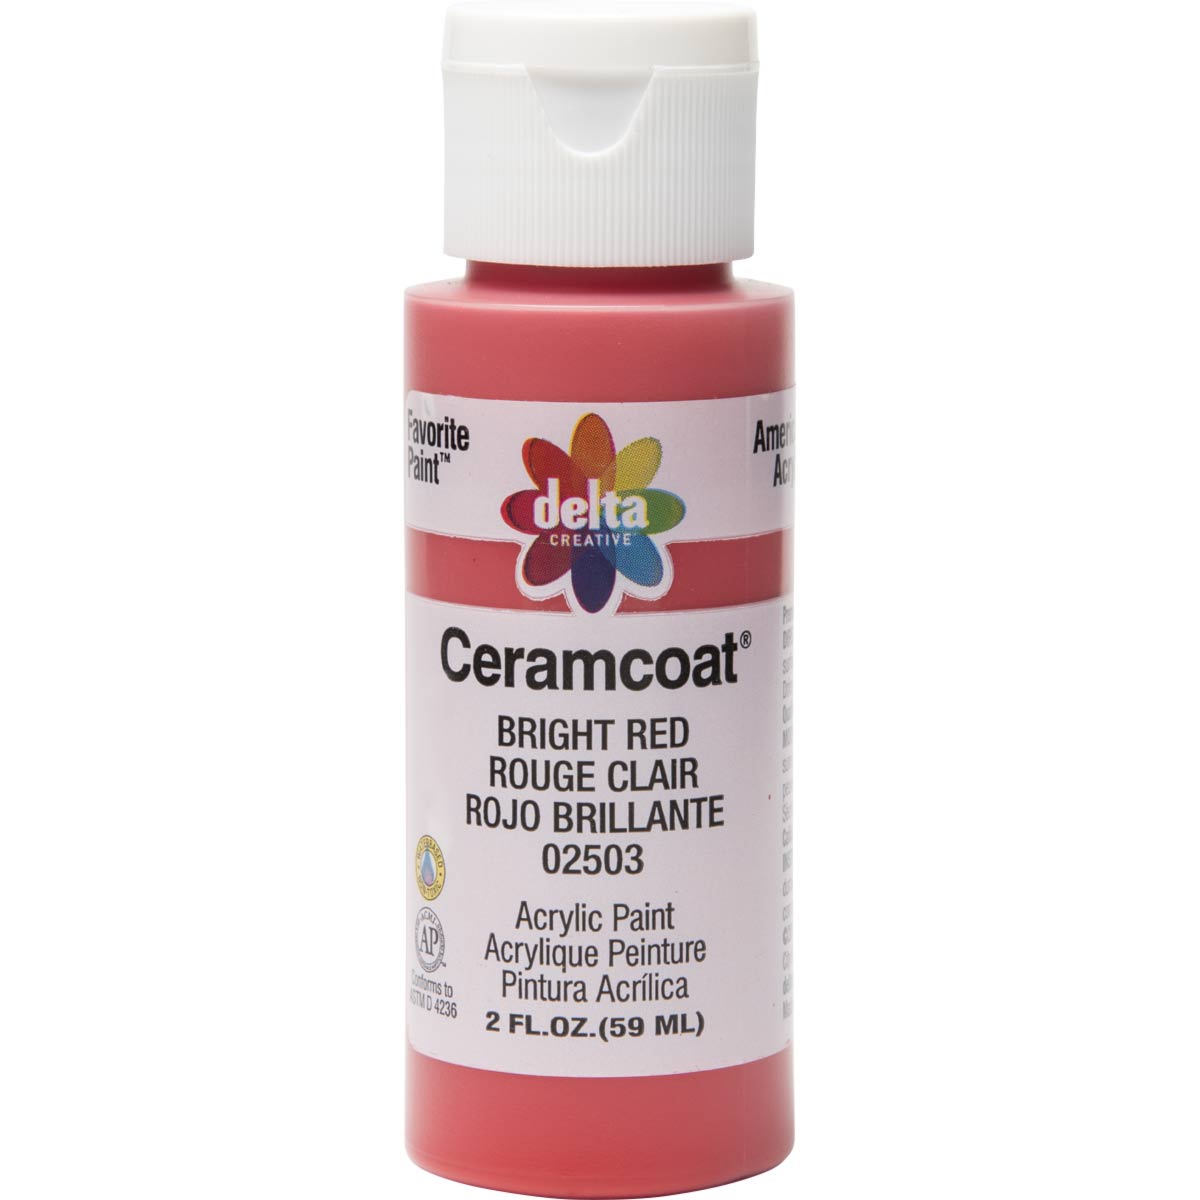 Delta Ceramcoat Acrylic Paint - Bright Red, 2 oz. - 025030202W